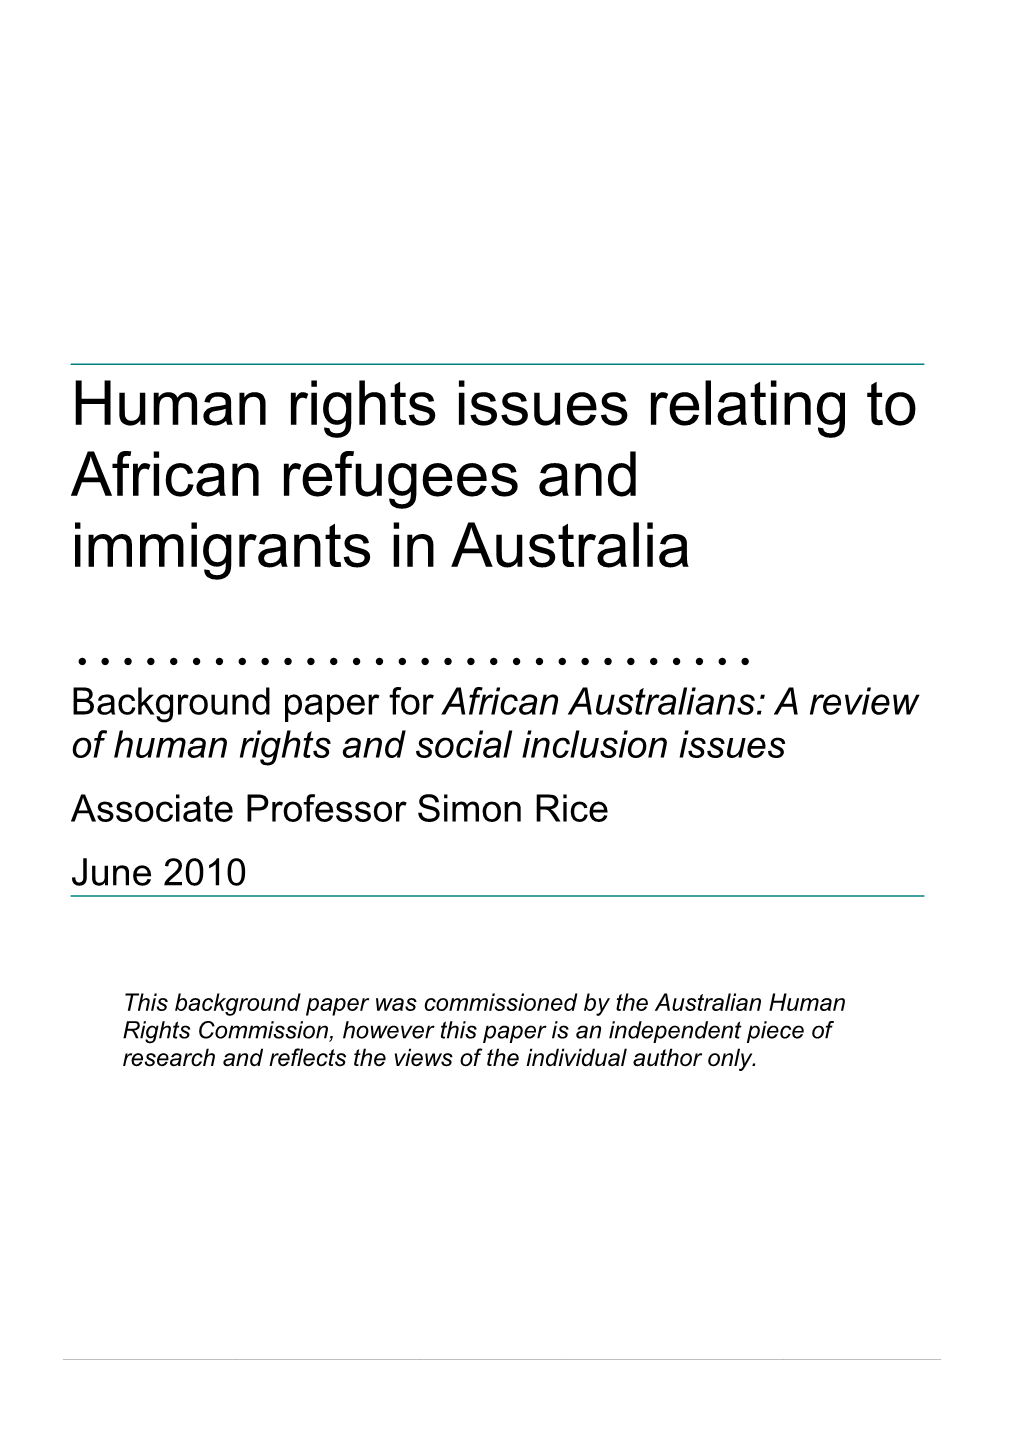 Human Rights Issues Relating to African Refugees and Immigrants in Australia